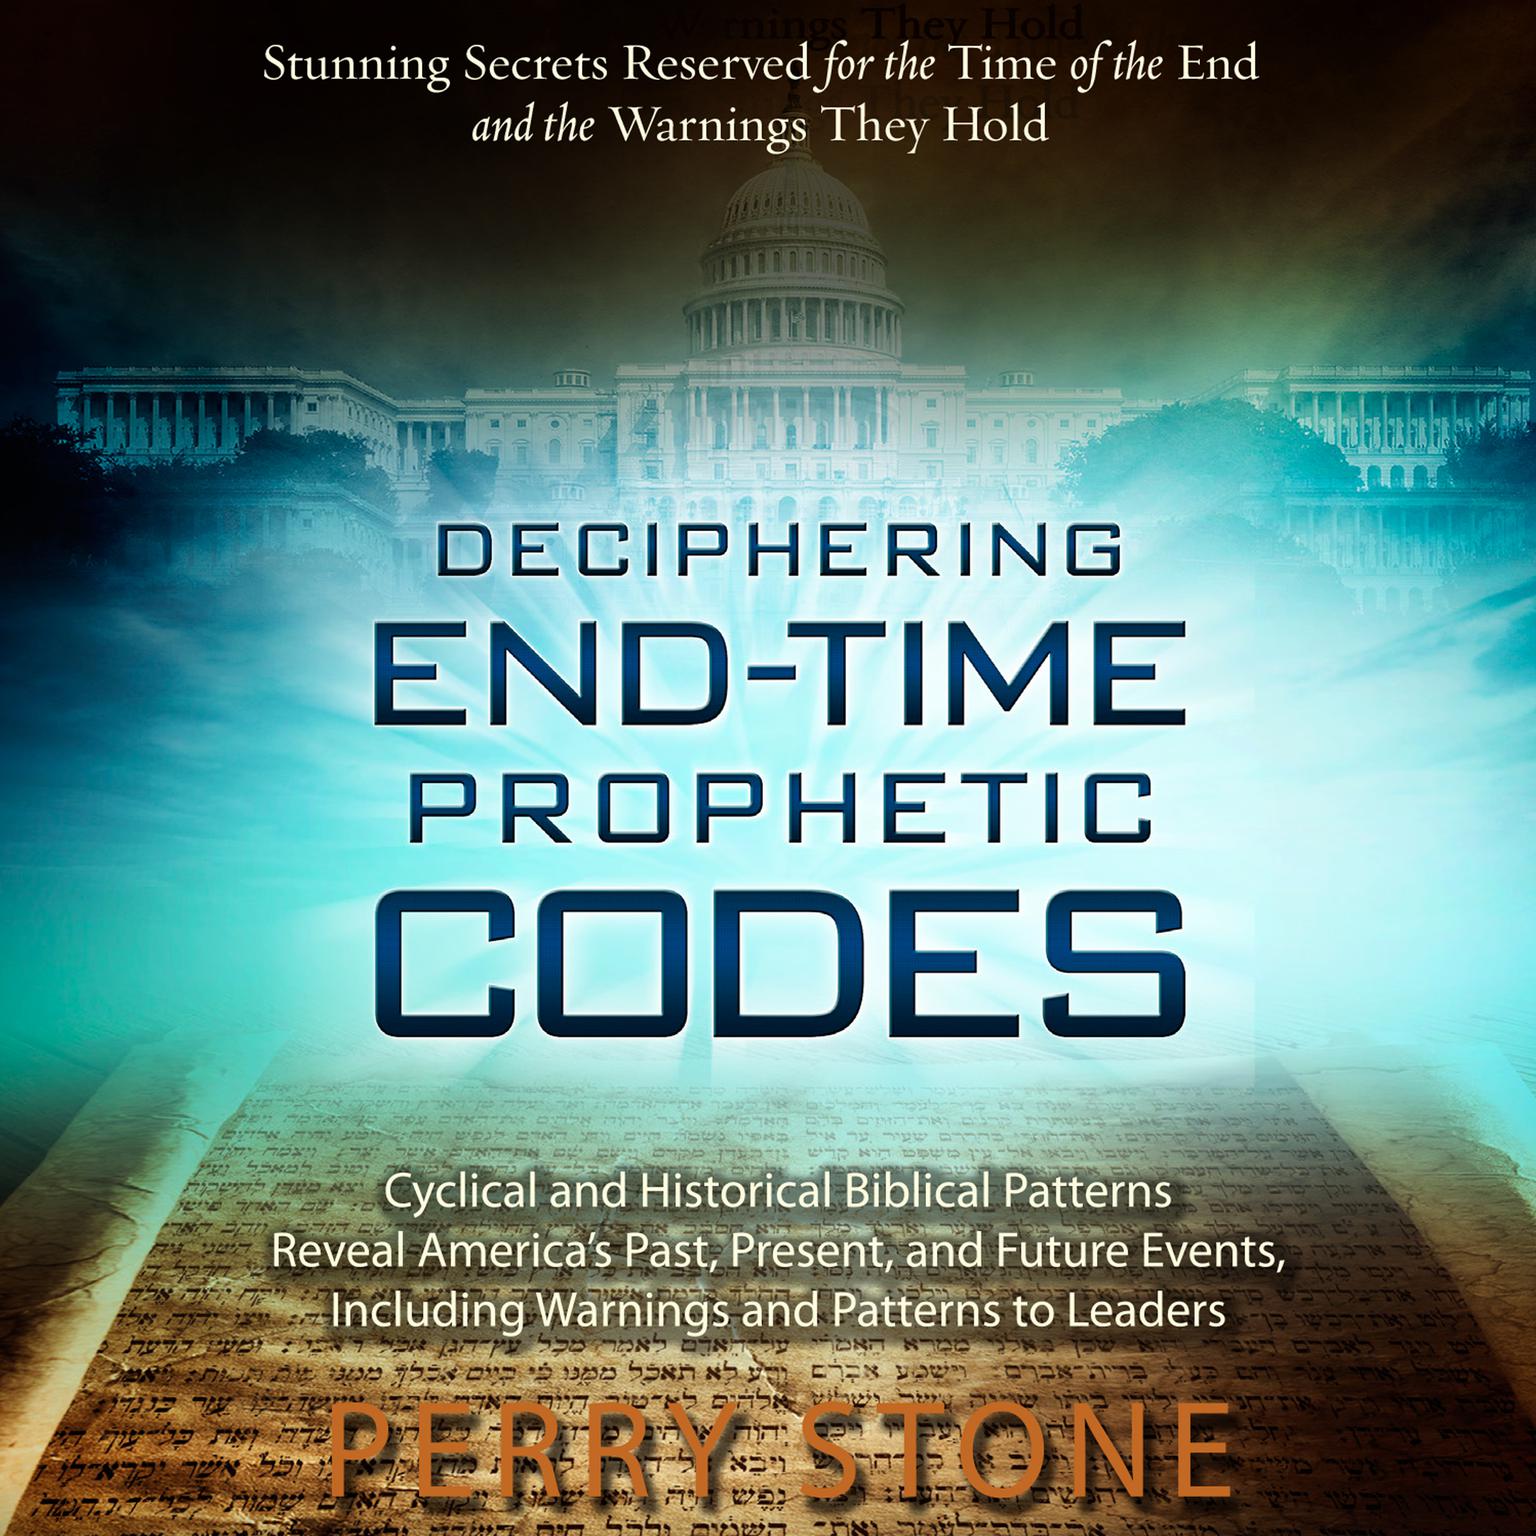 Deciphering End-Time Prophetic Codes: Cyclical and Historical Biblical Patterns Reveal Americas Past, Present and Future Events, including Warnings and Patterns to Leaders Audiobook, by Perry Stone